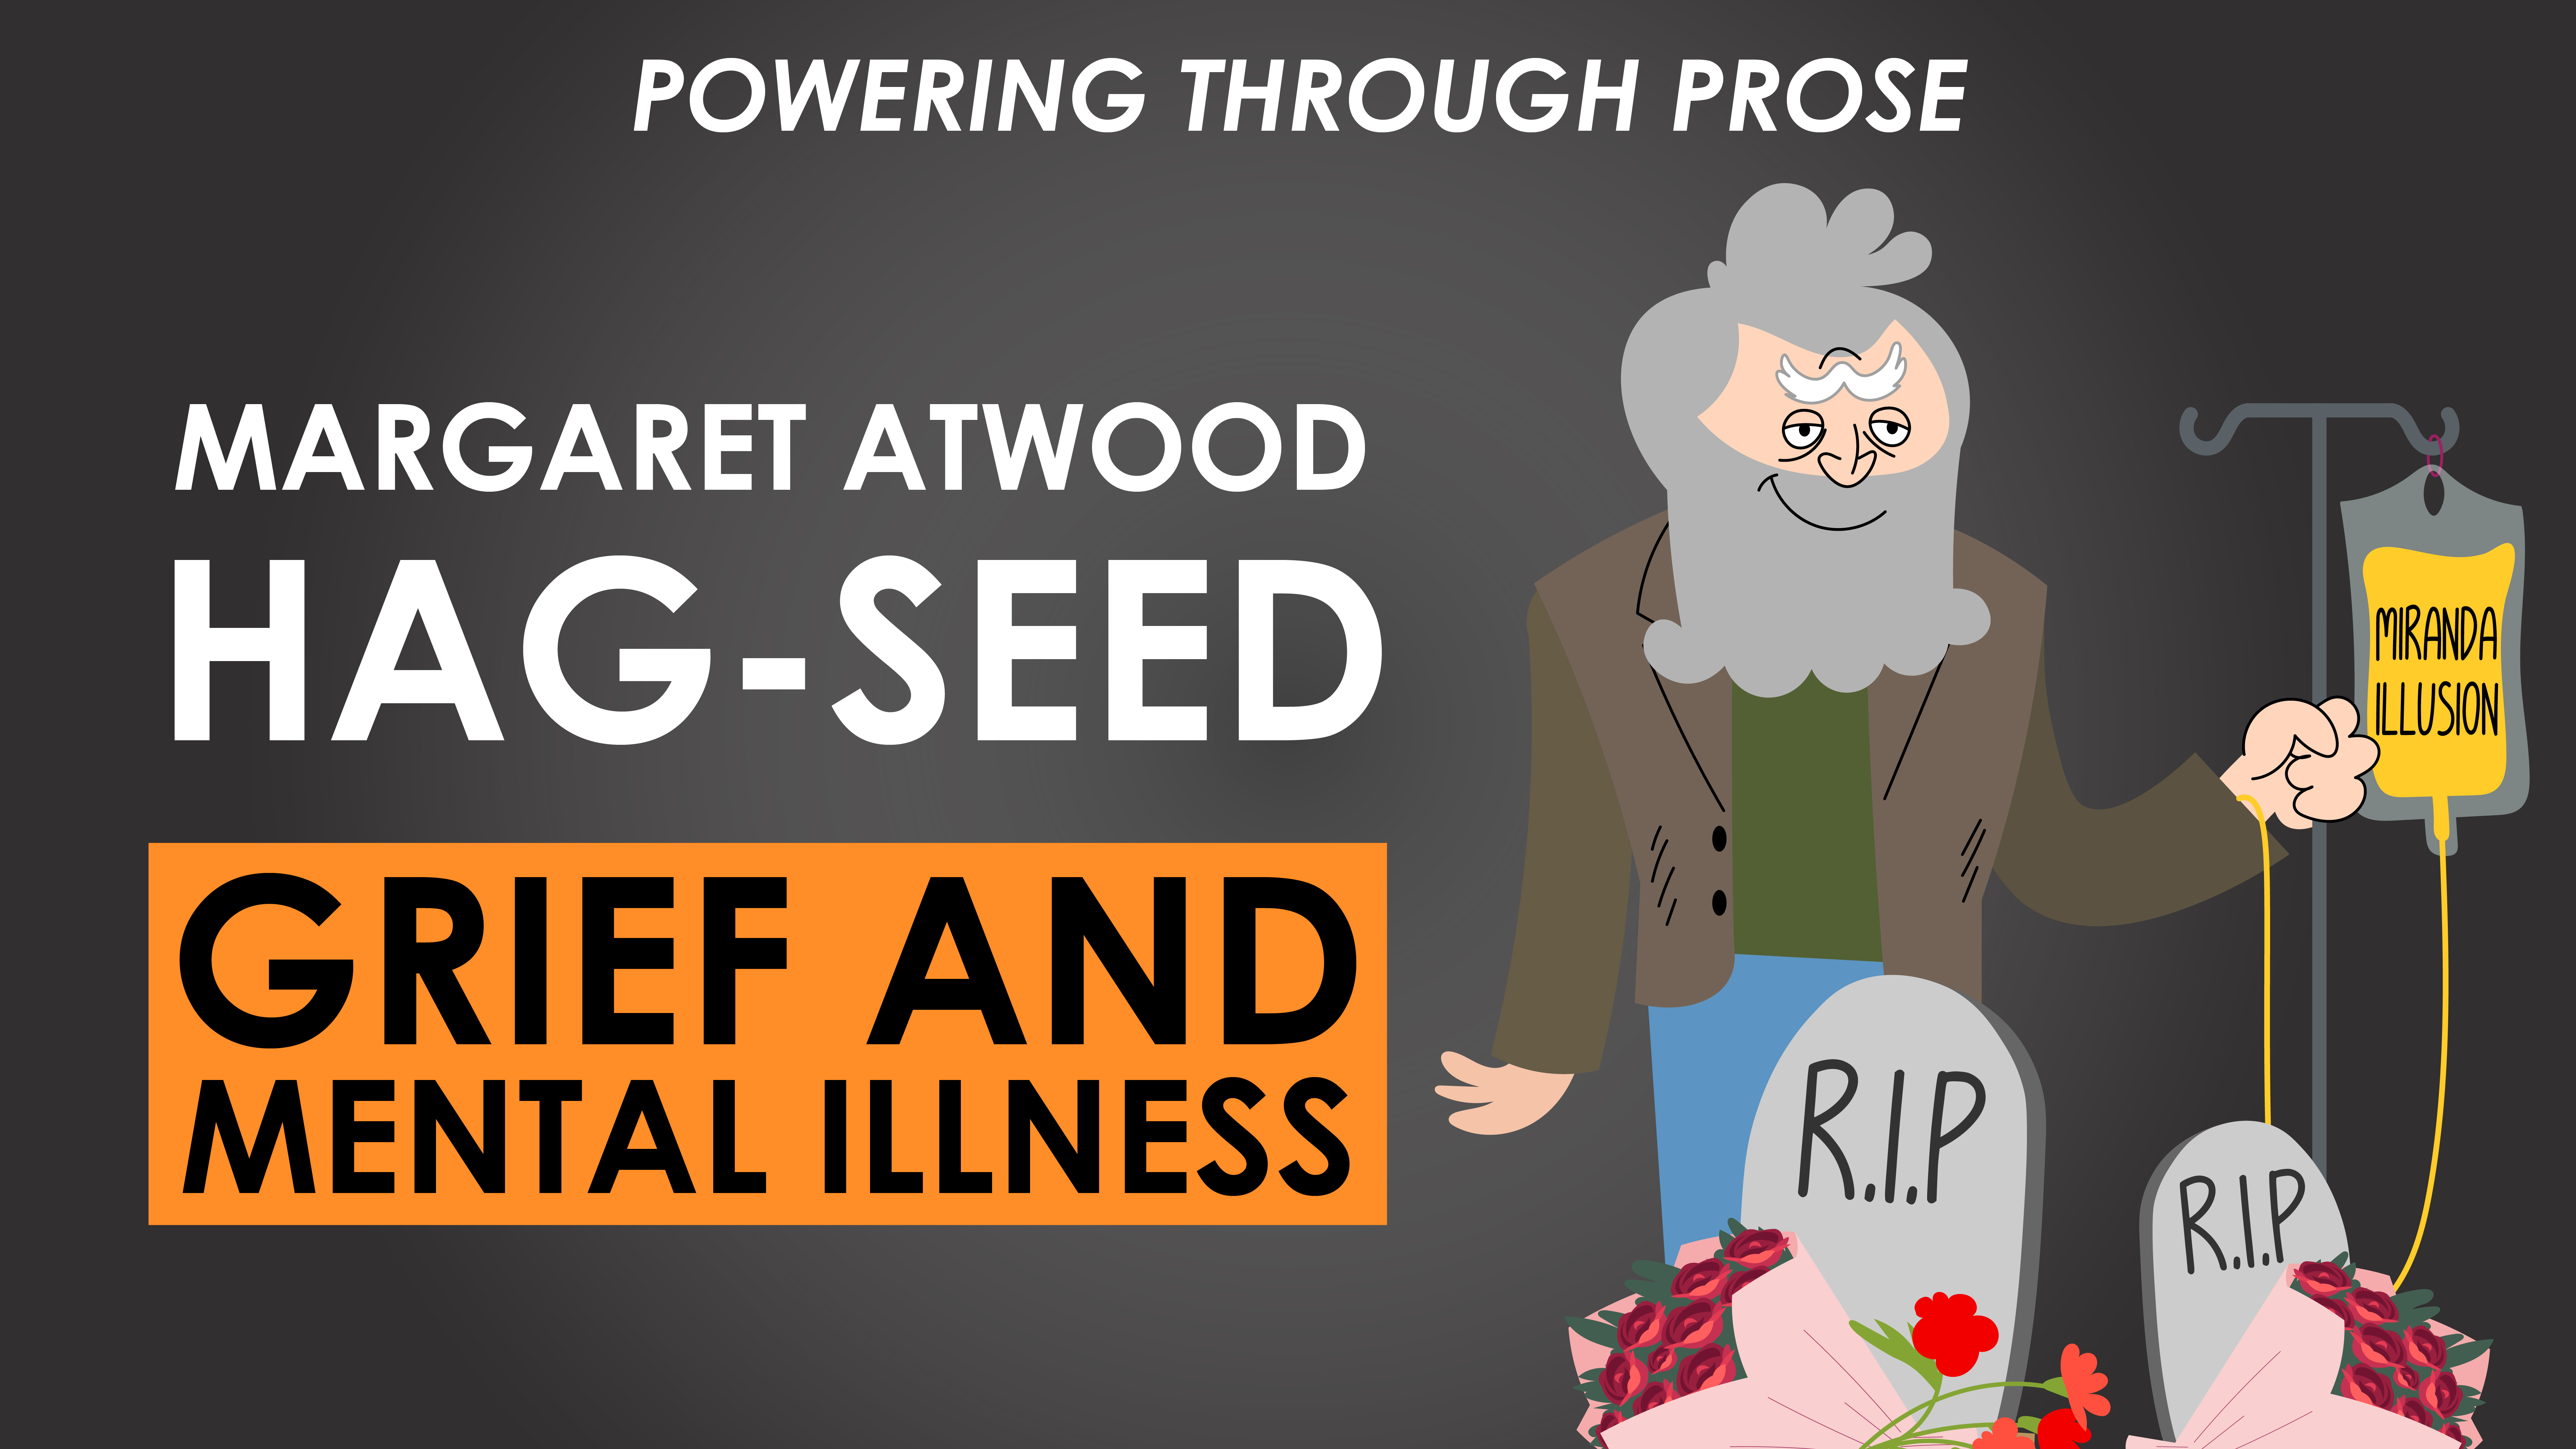 Hag-Seed - Margaret Atwood - Grief and Mental Illness - Powering through Prose Series